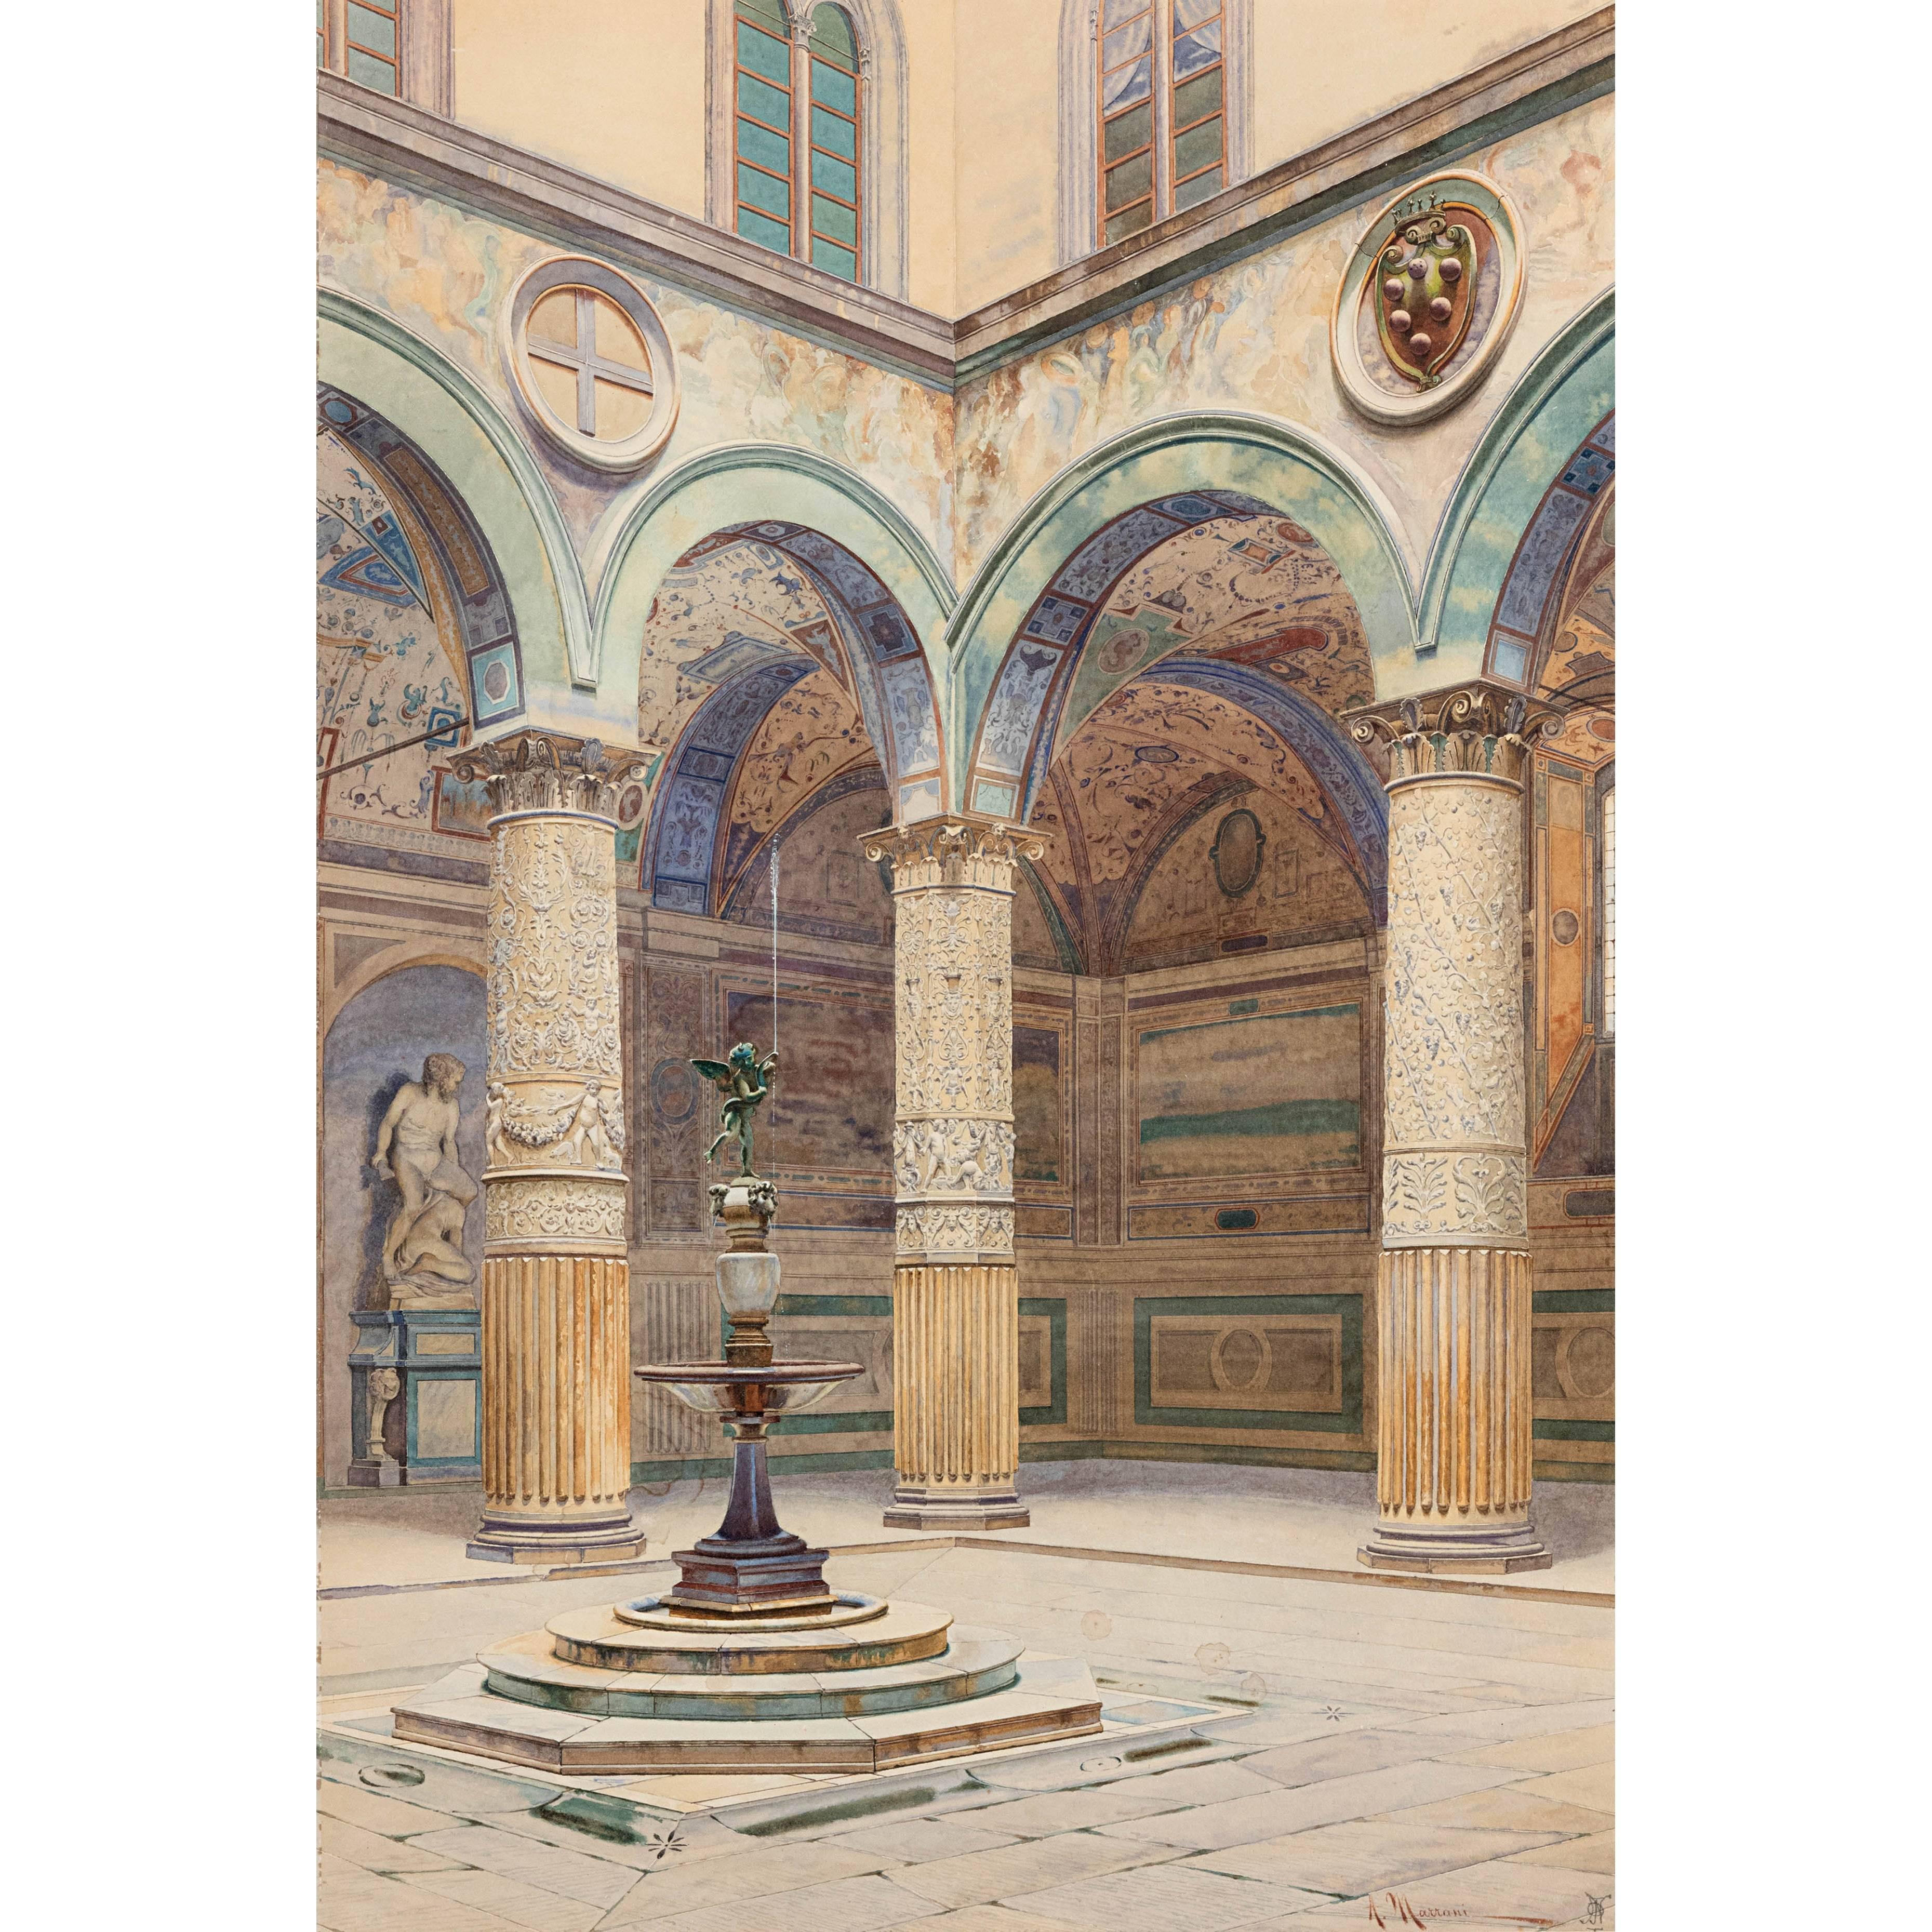 Watercolour painting by A. Marrani of Palazzo Ducale, Venice